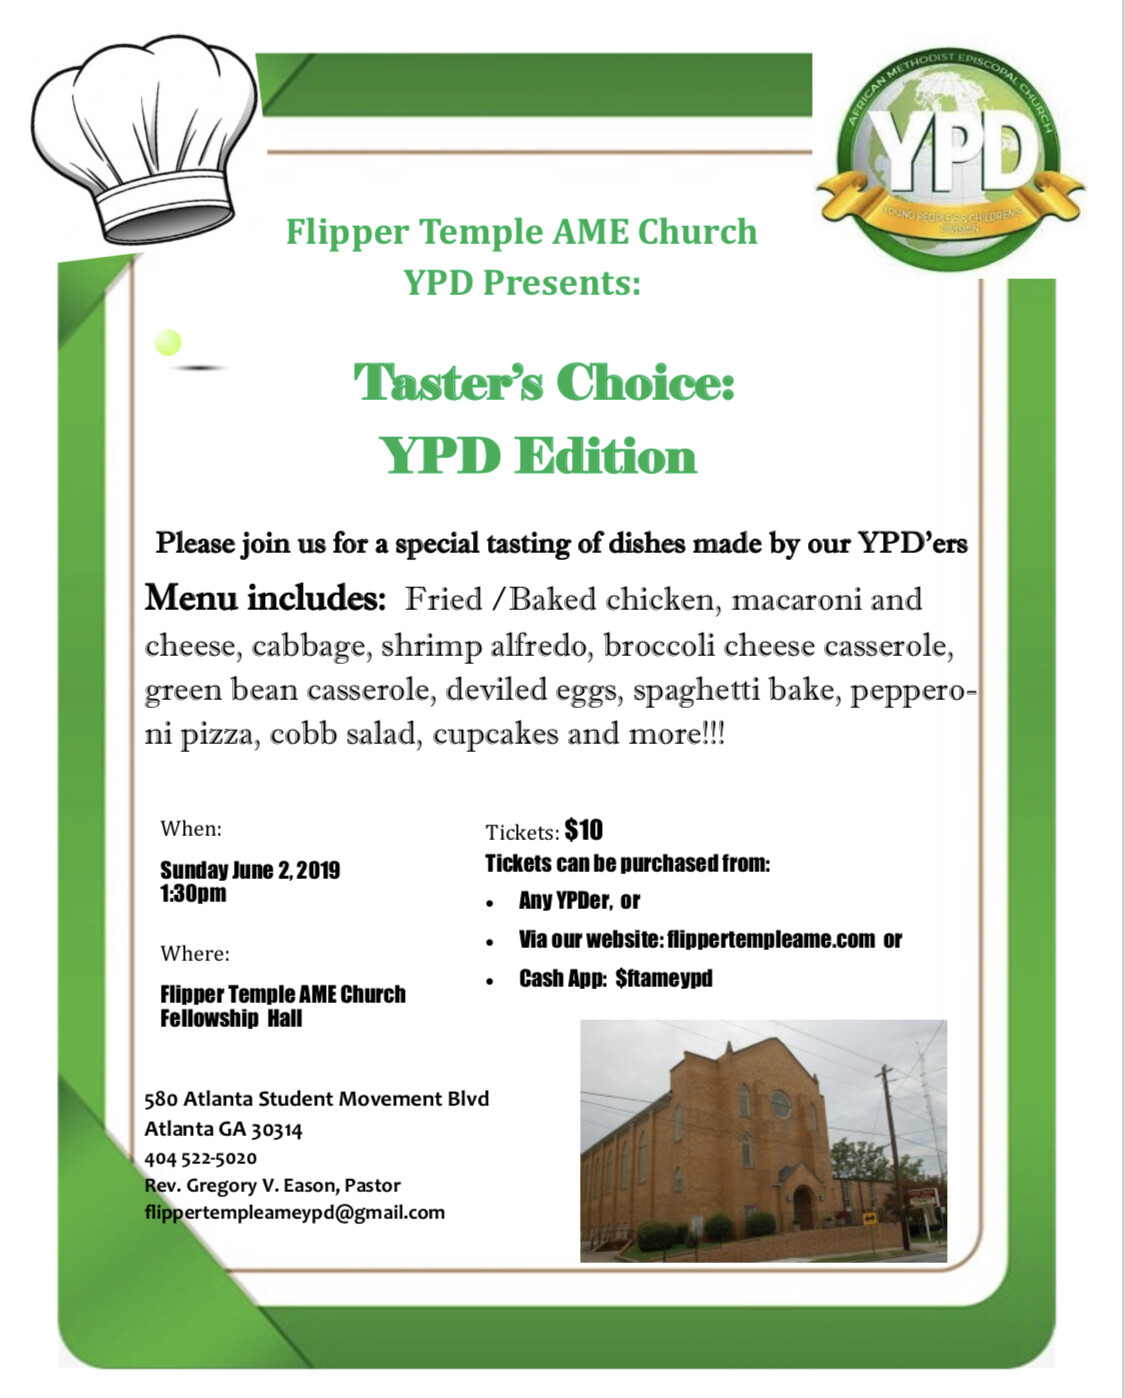 Taster's Choice: YPD Edition 